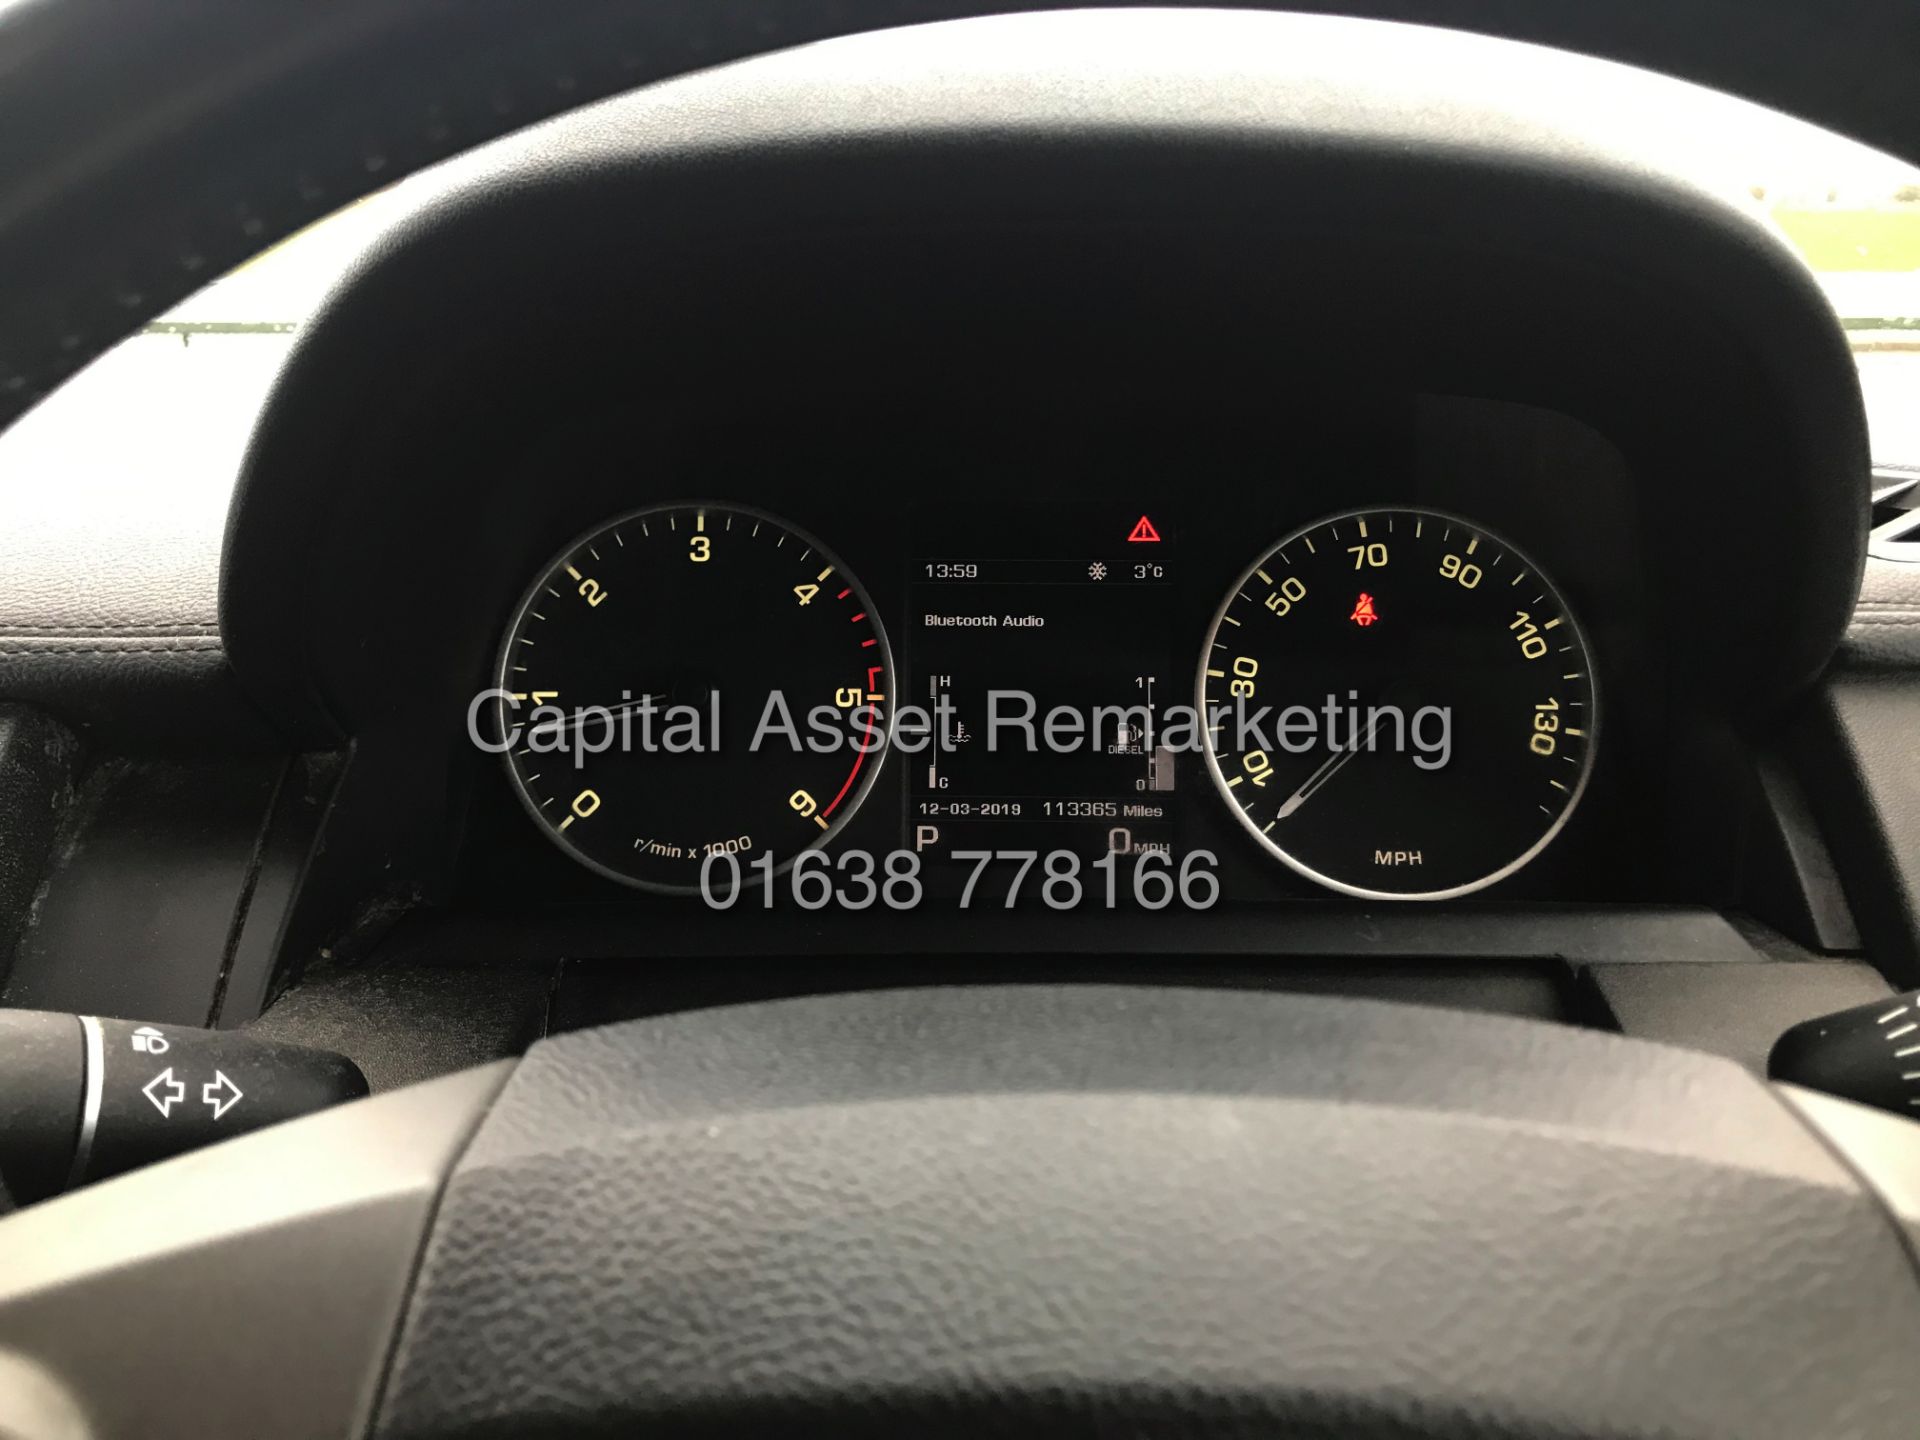 LANDROVER DISCOVERY 4 "SE" AUTO 3.0SDV6 - (2016 REG) 1 KEEPER - SAT NAV - LEATHER - HUGE SPEC -WOW! - Image 12 of 20